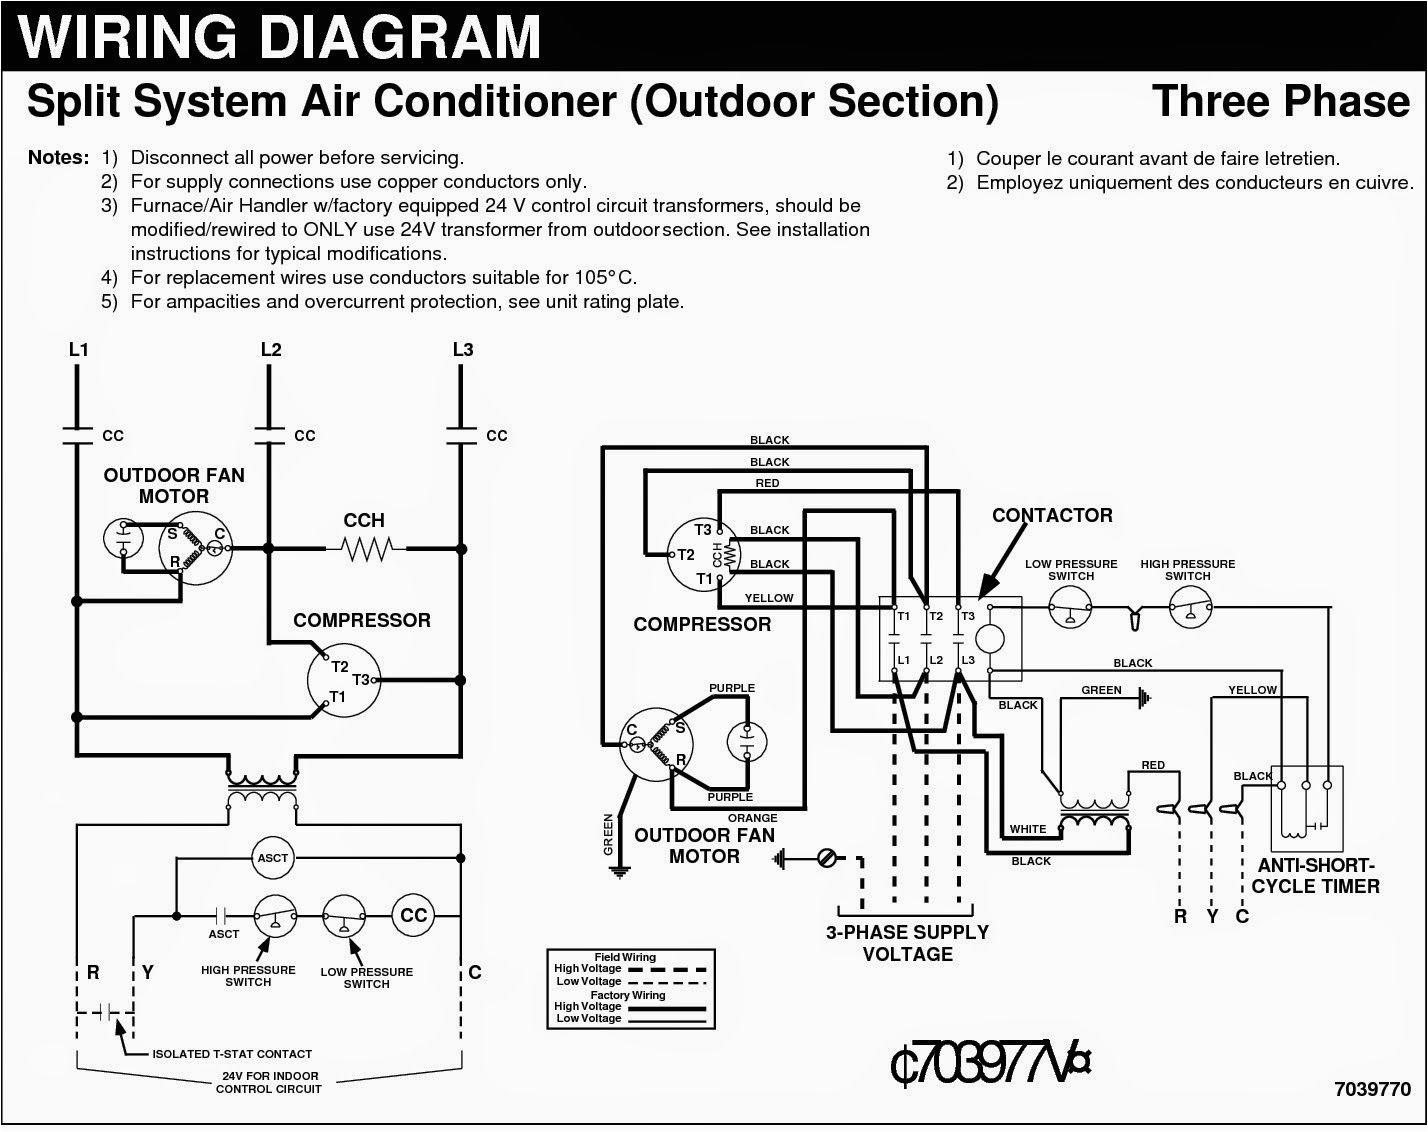 3 phase electric heater wiring diagram schematic wiring diagram 3 phase heater wiring diagram basco